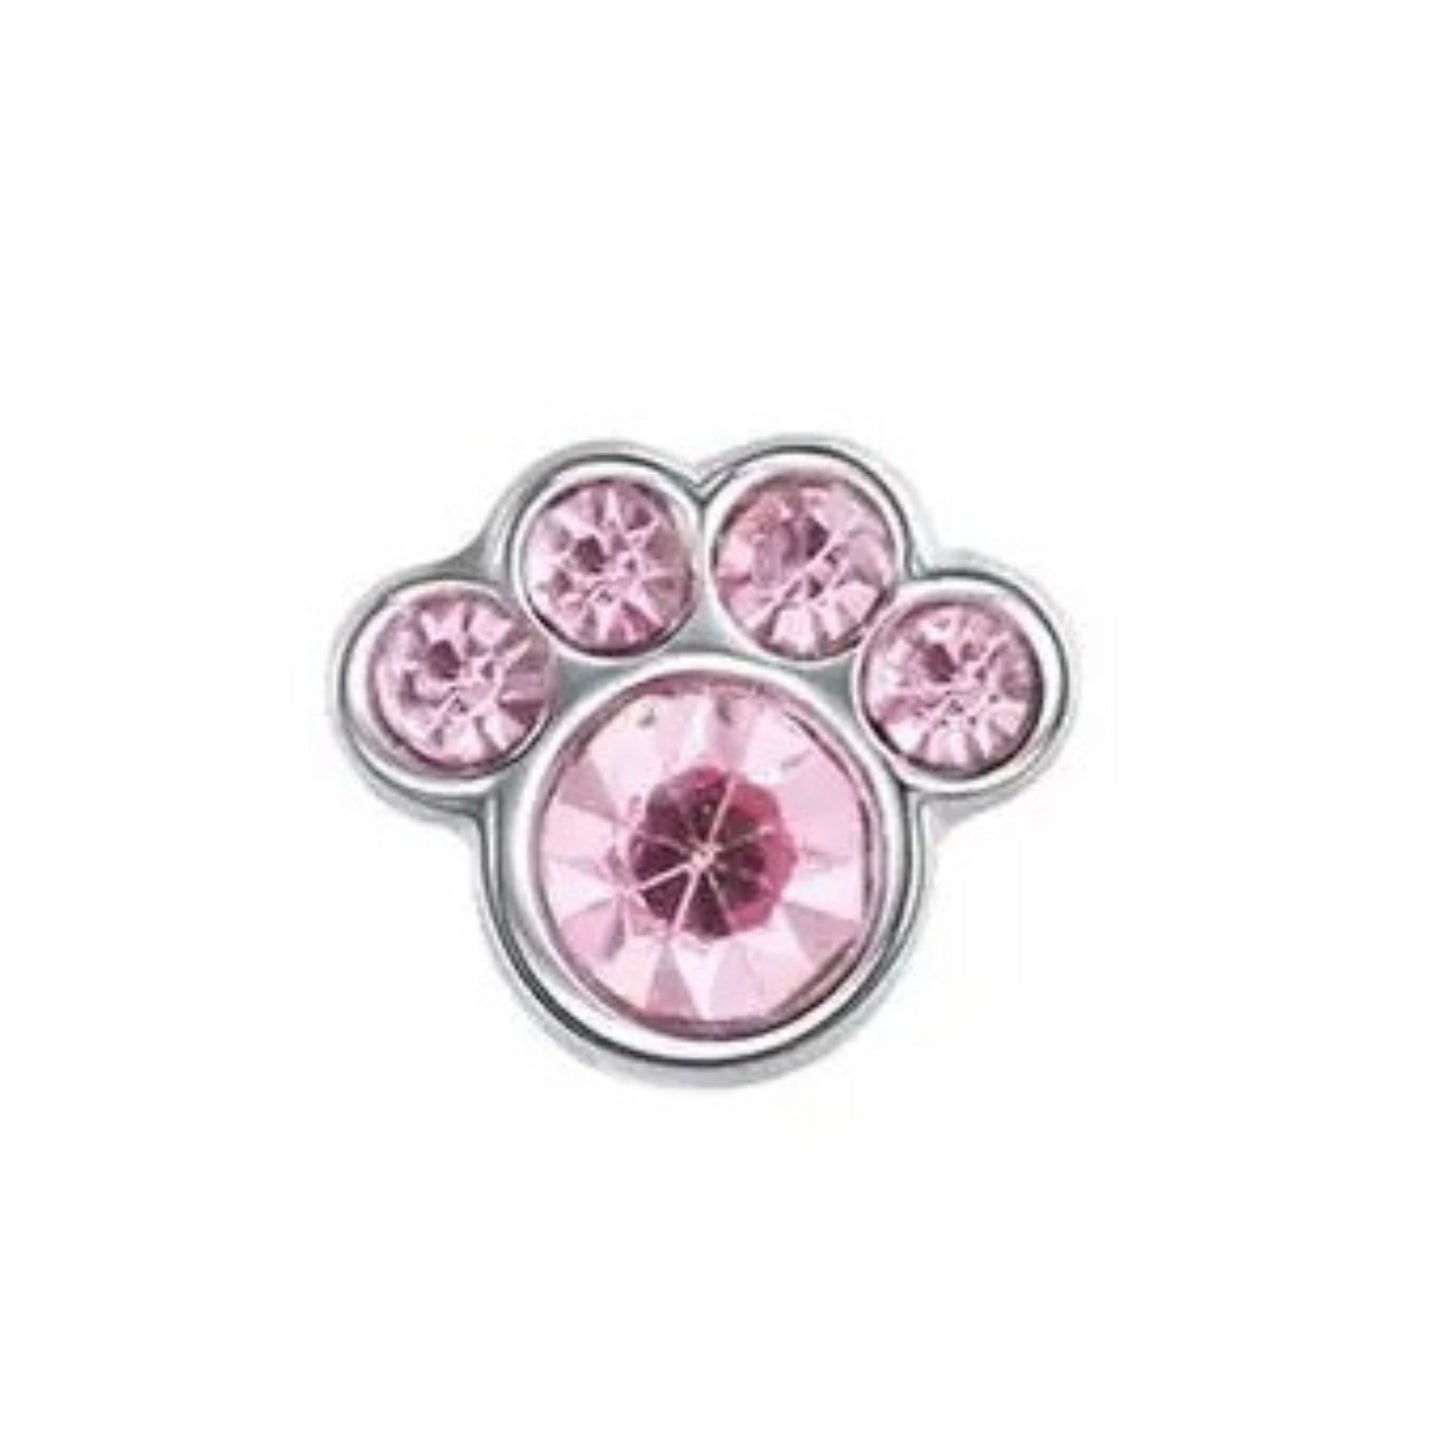 Memory Locket Charm - Paw (pink) - The Little Jewellery Company